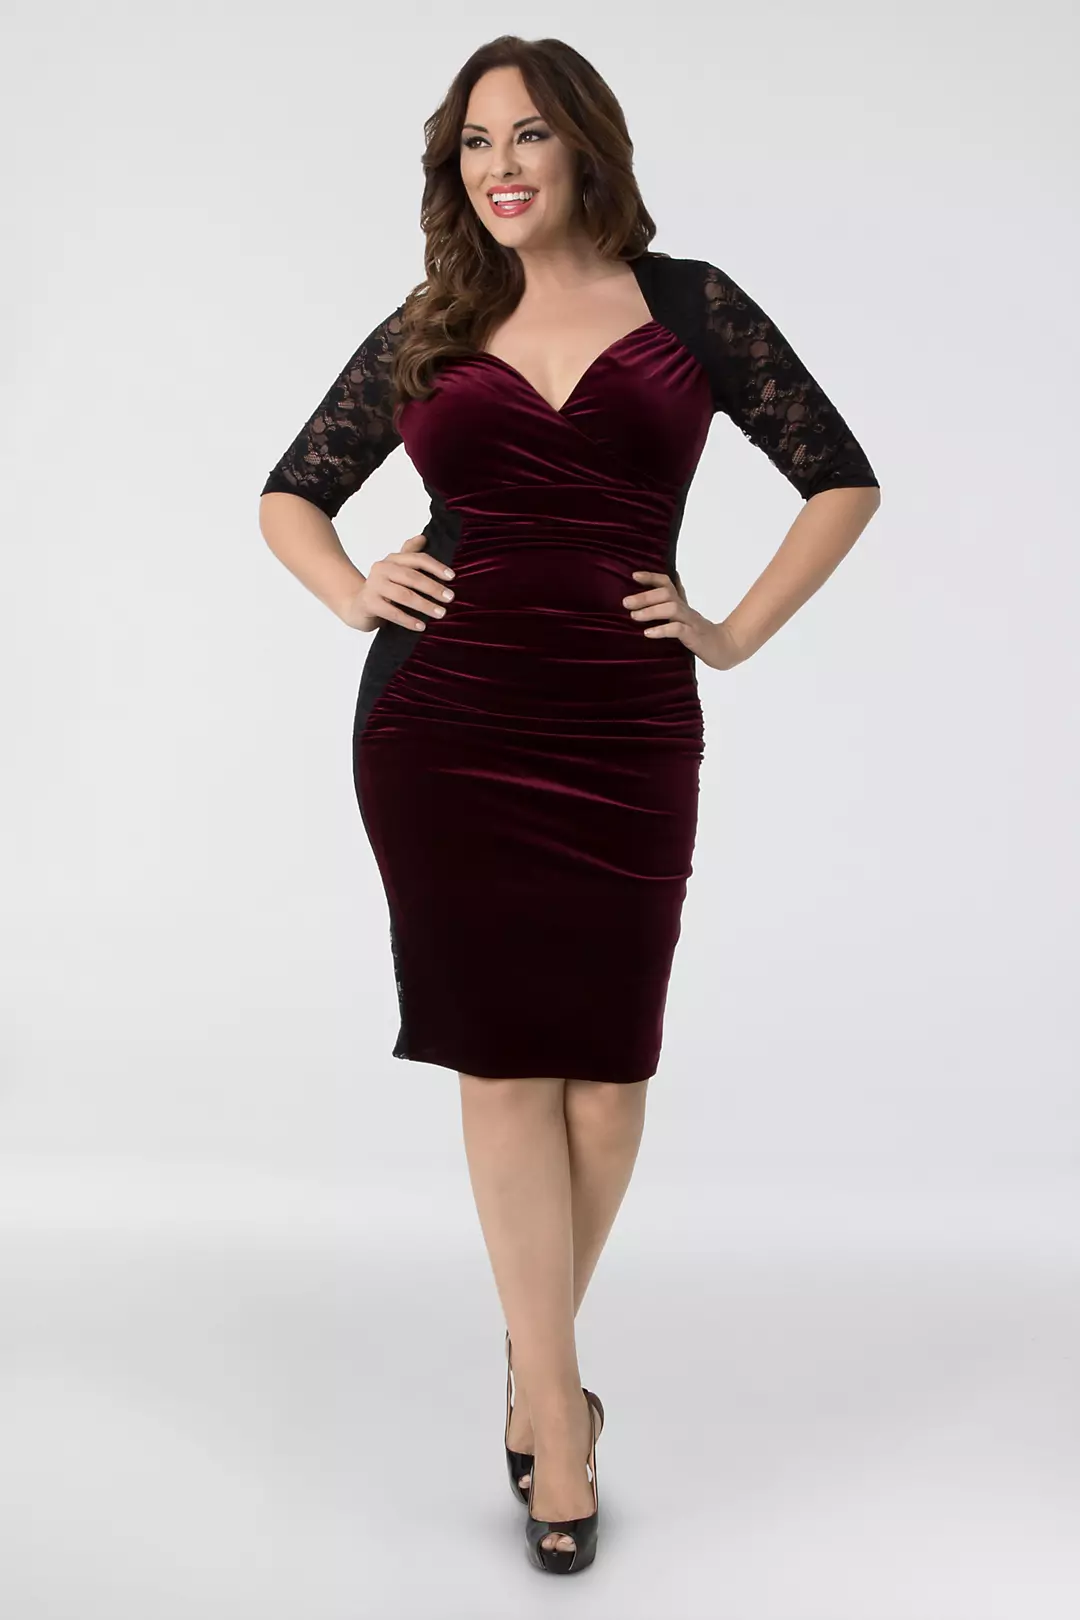 Page 7: Hourglass Body Clothing, Curvy Fashion